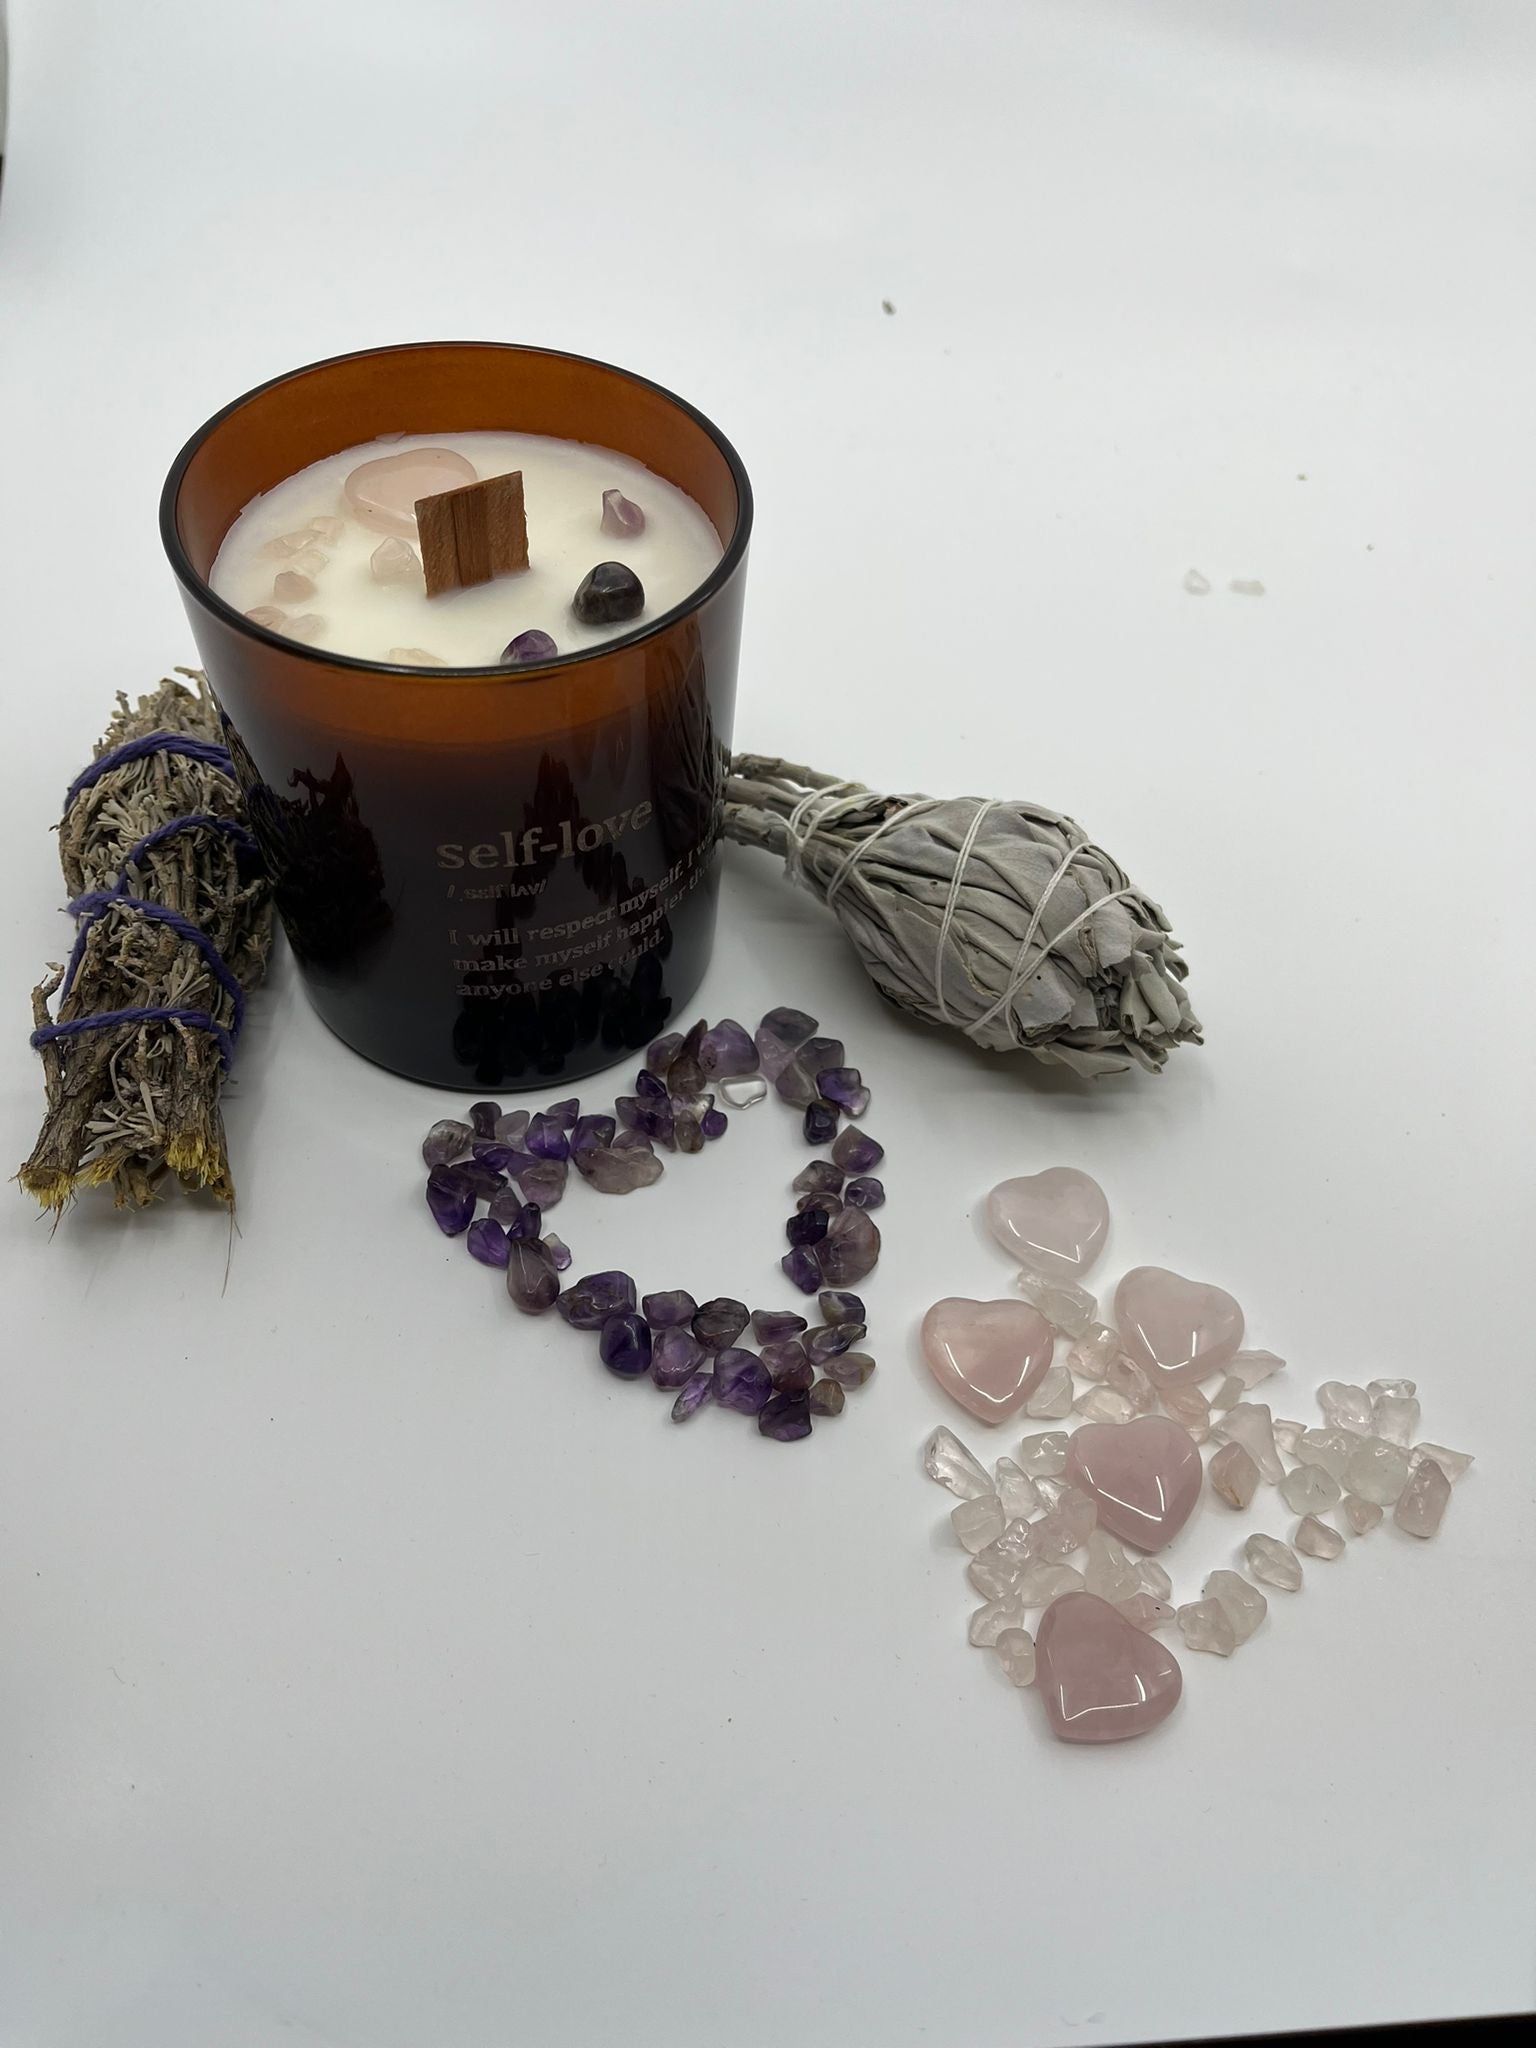 ***LIMITED EDITION*** Crystal Affirmation Candle: Uplifting Blueberry & Vanilla Scent, Handmade with Organic Rapeseed & Coconut Wax Blend - Everyday Rocks